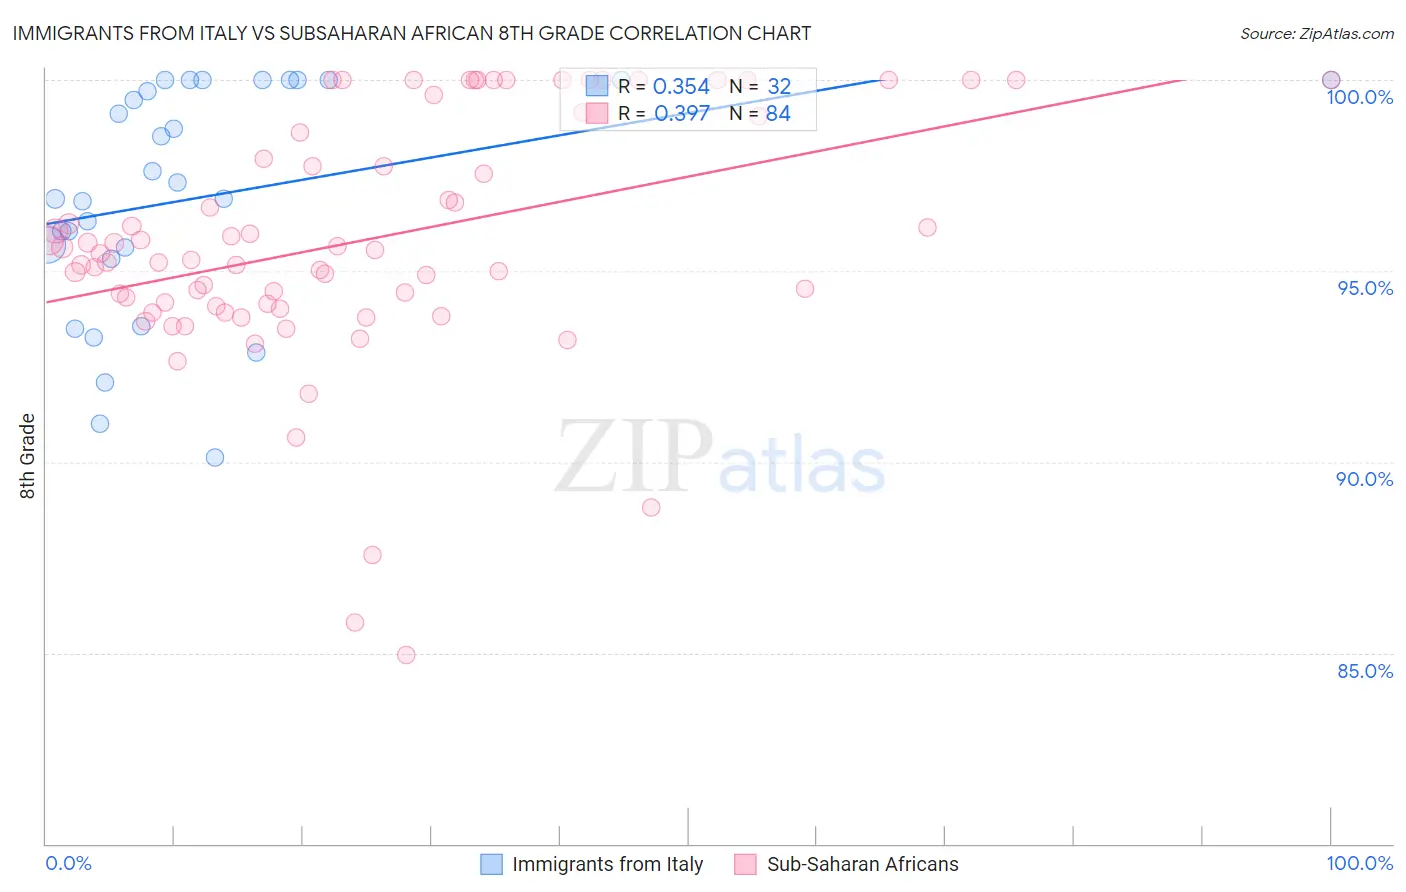 Immigrants from Italy vs Subsaharan African 8th Grade